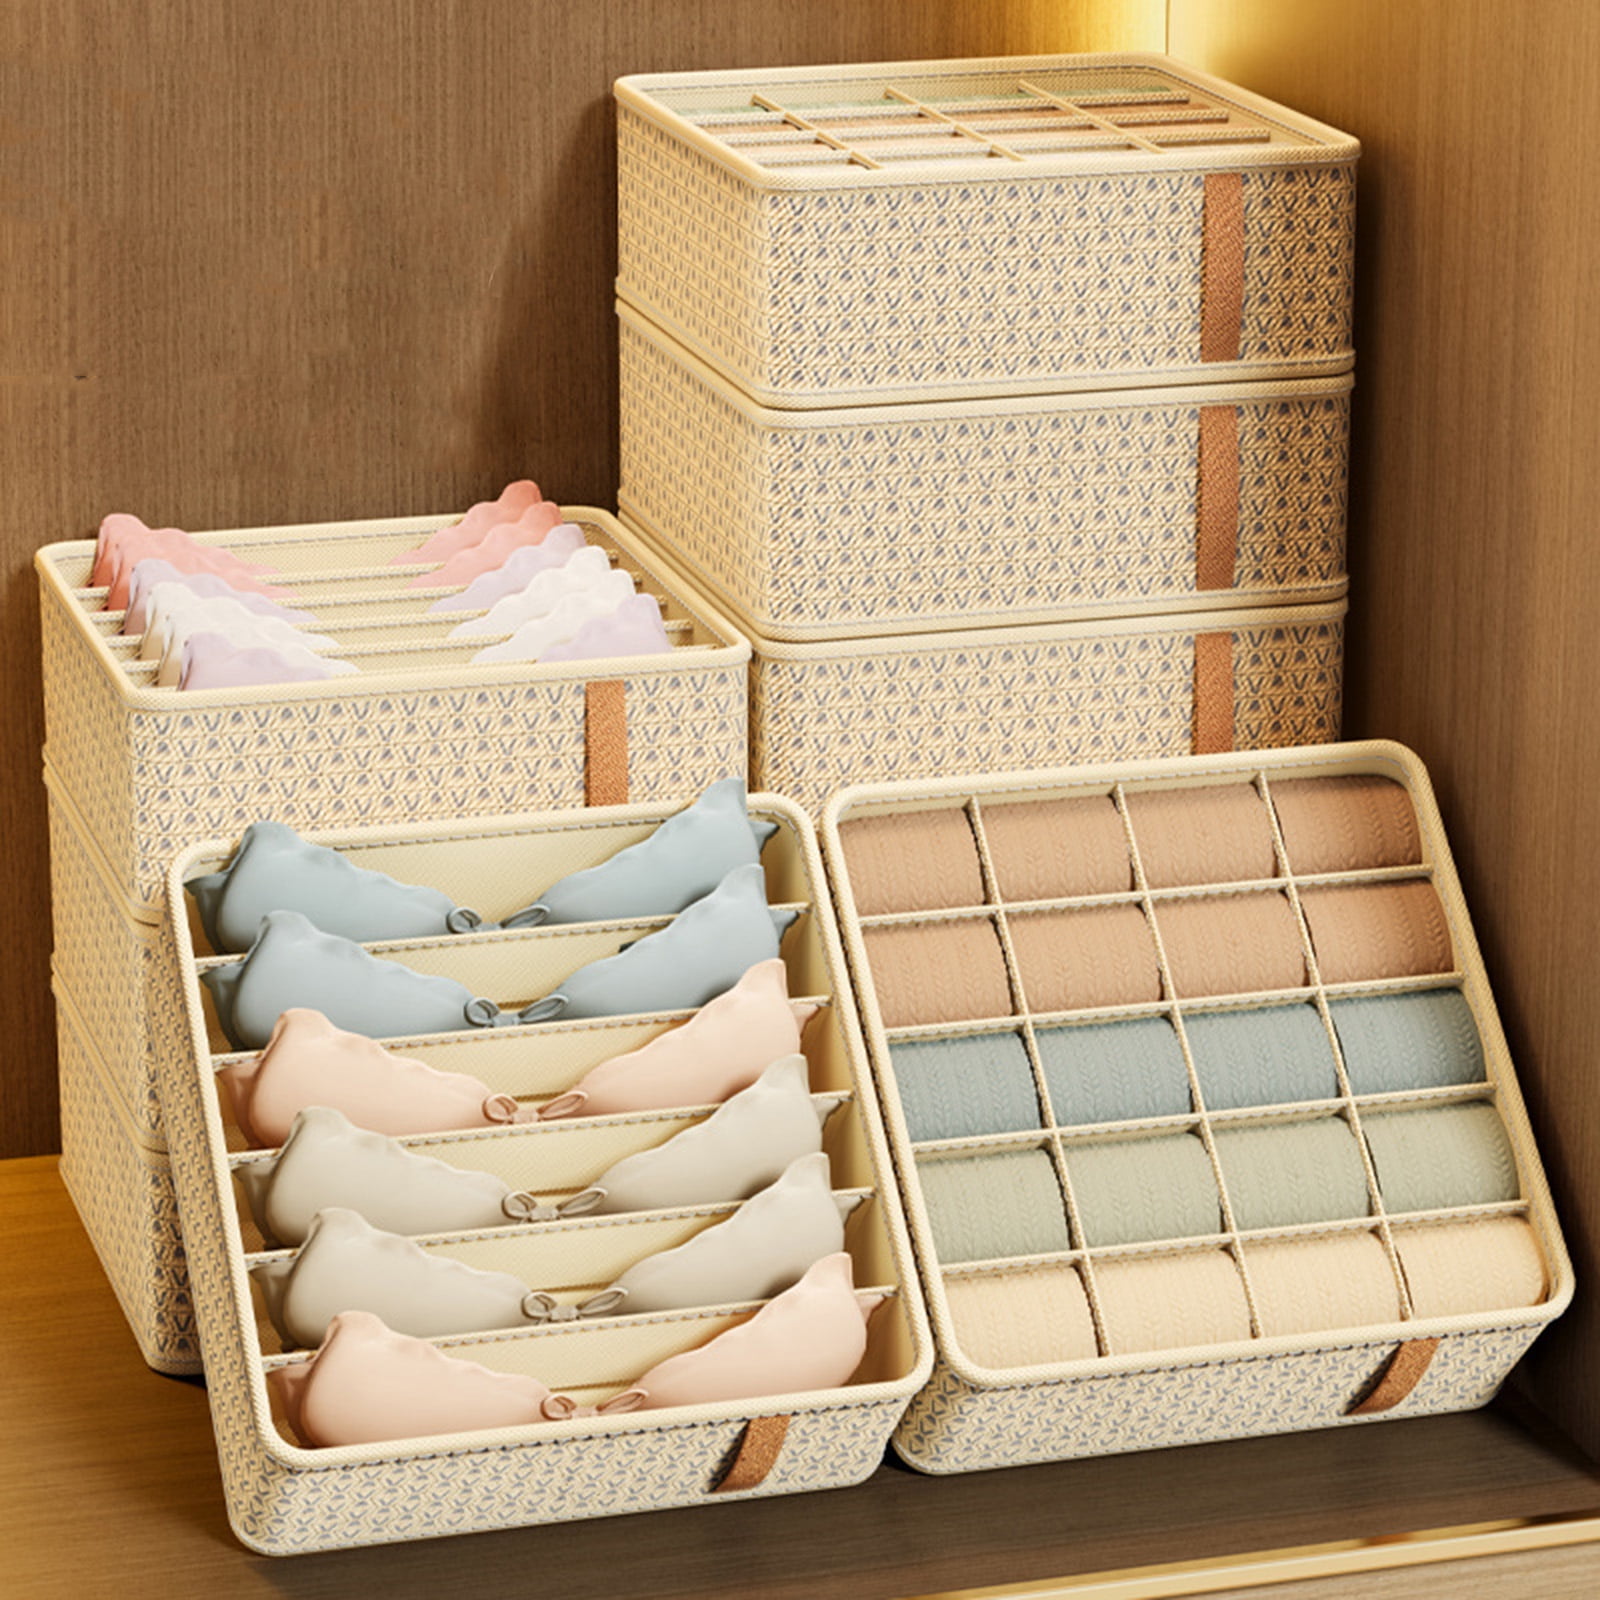 Bra Socks Panty Stackable Cosmetic Organizer Drawers Foldable